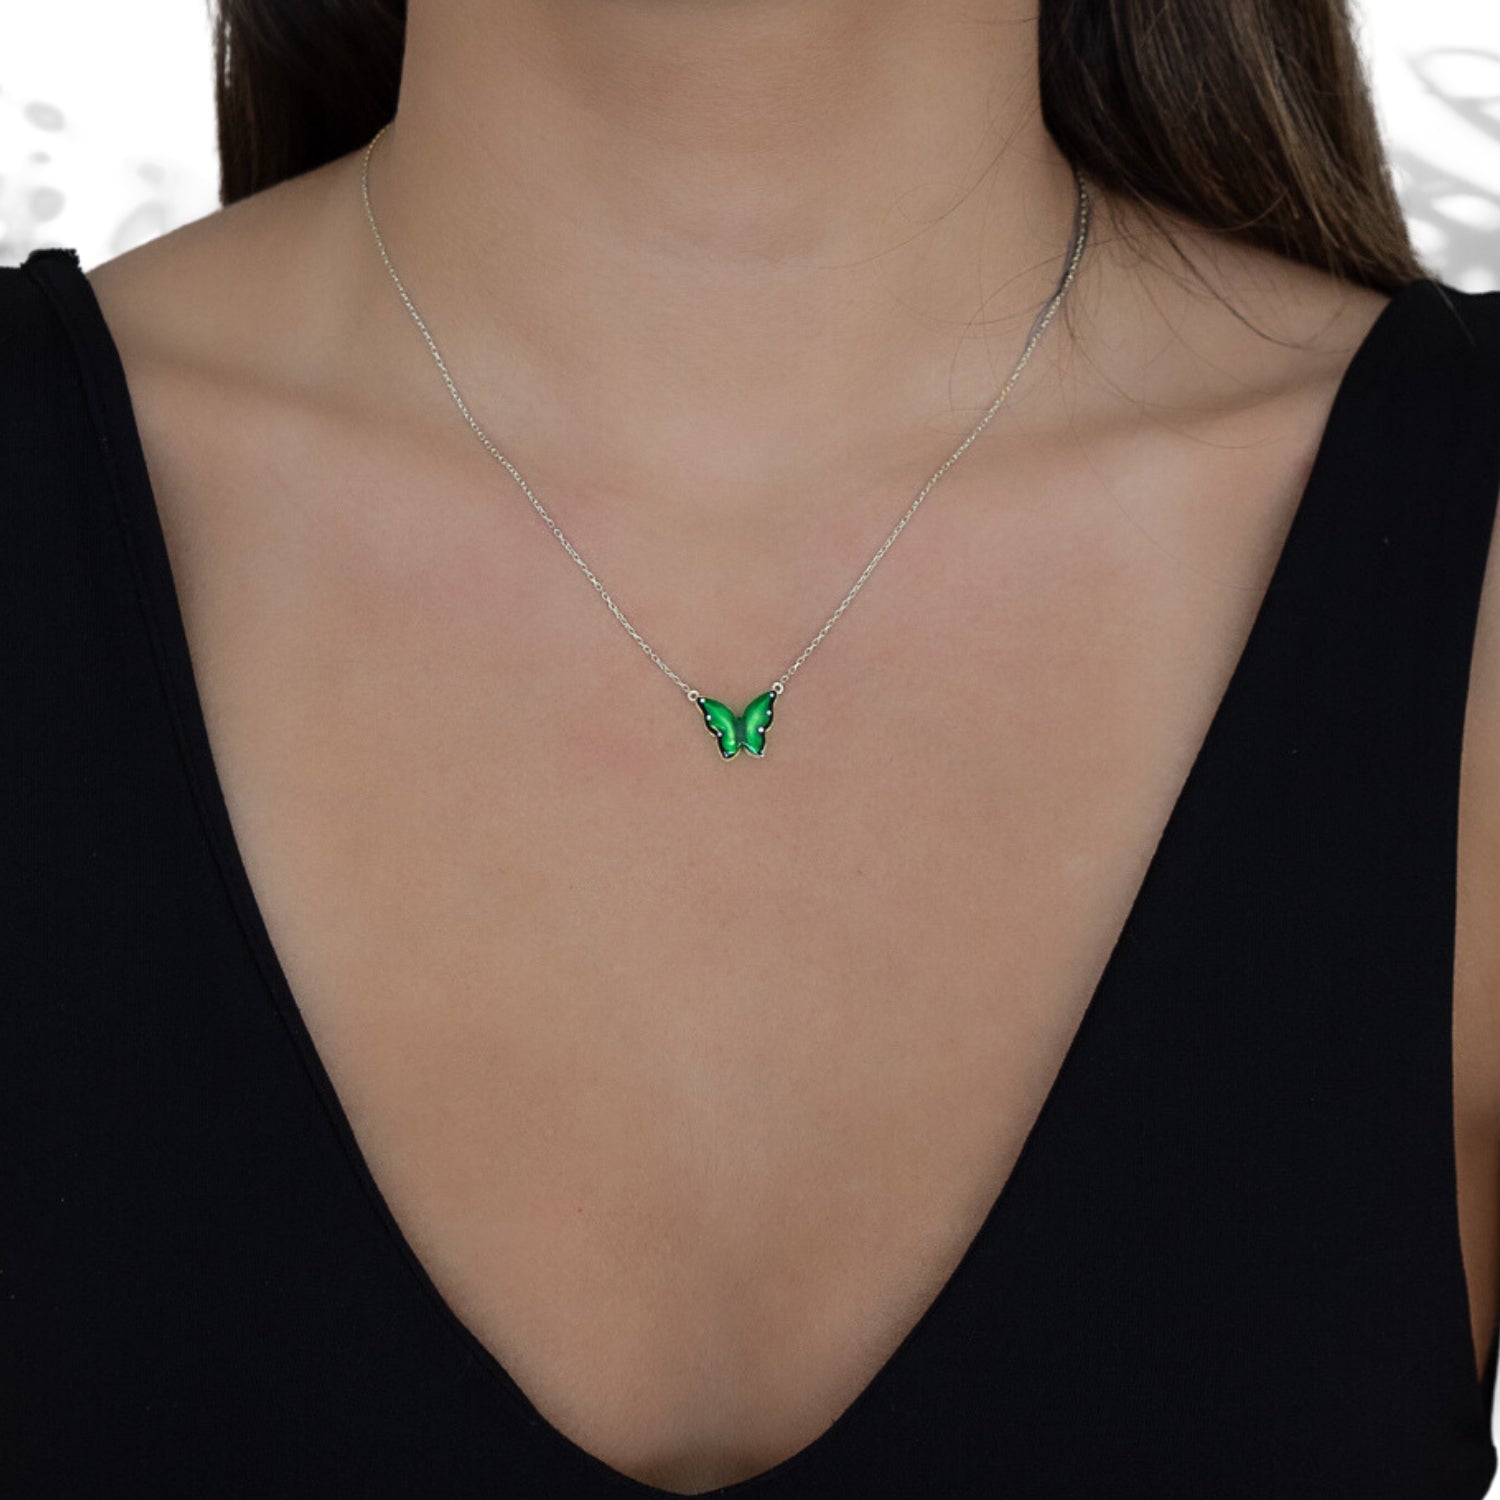 A model wearing the Silver Abundance Green Enamel Butterfly Necklace, radiating spirituality and inner growth.